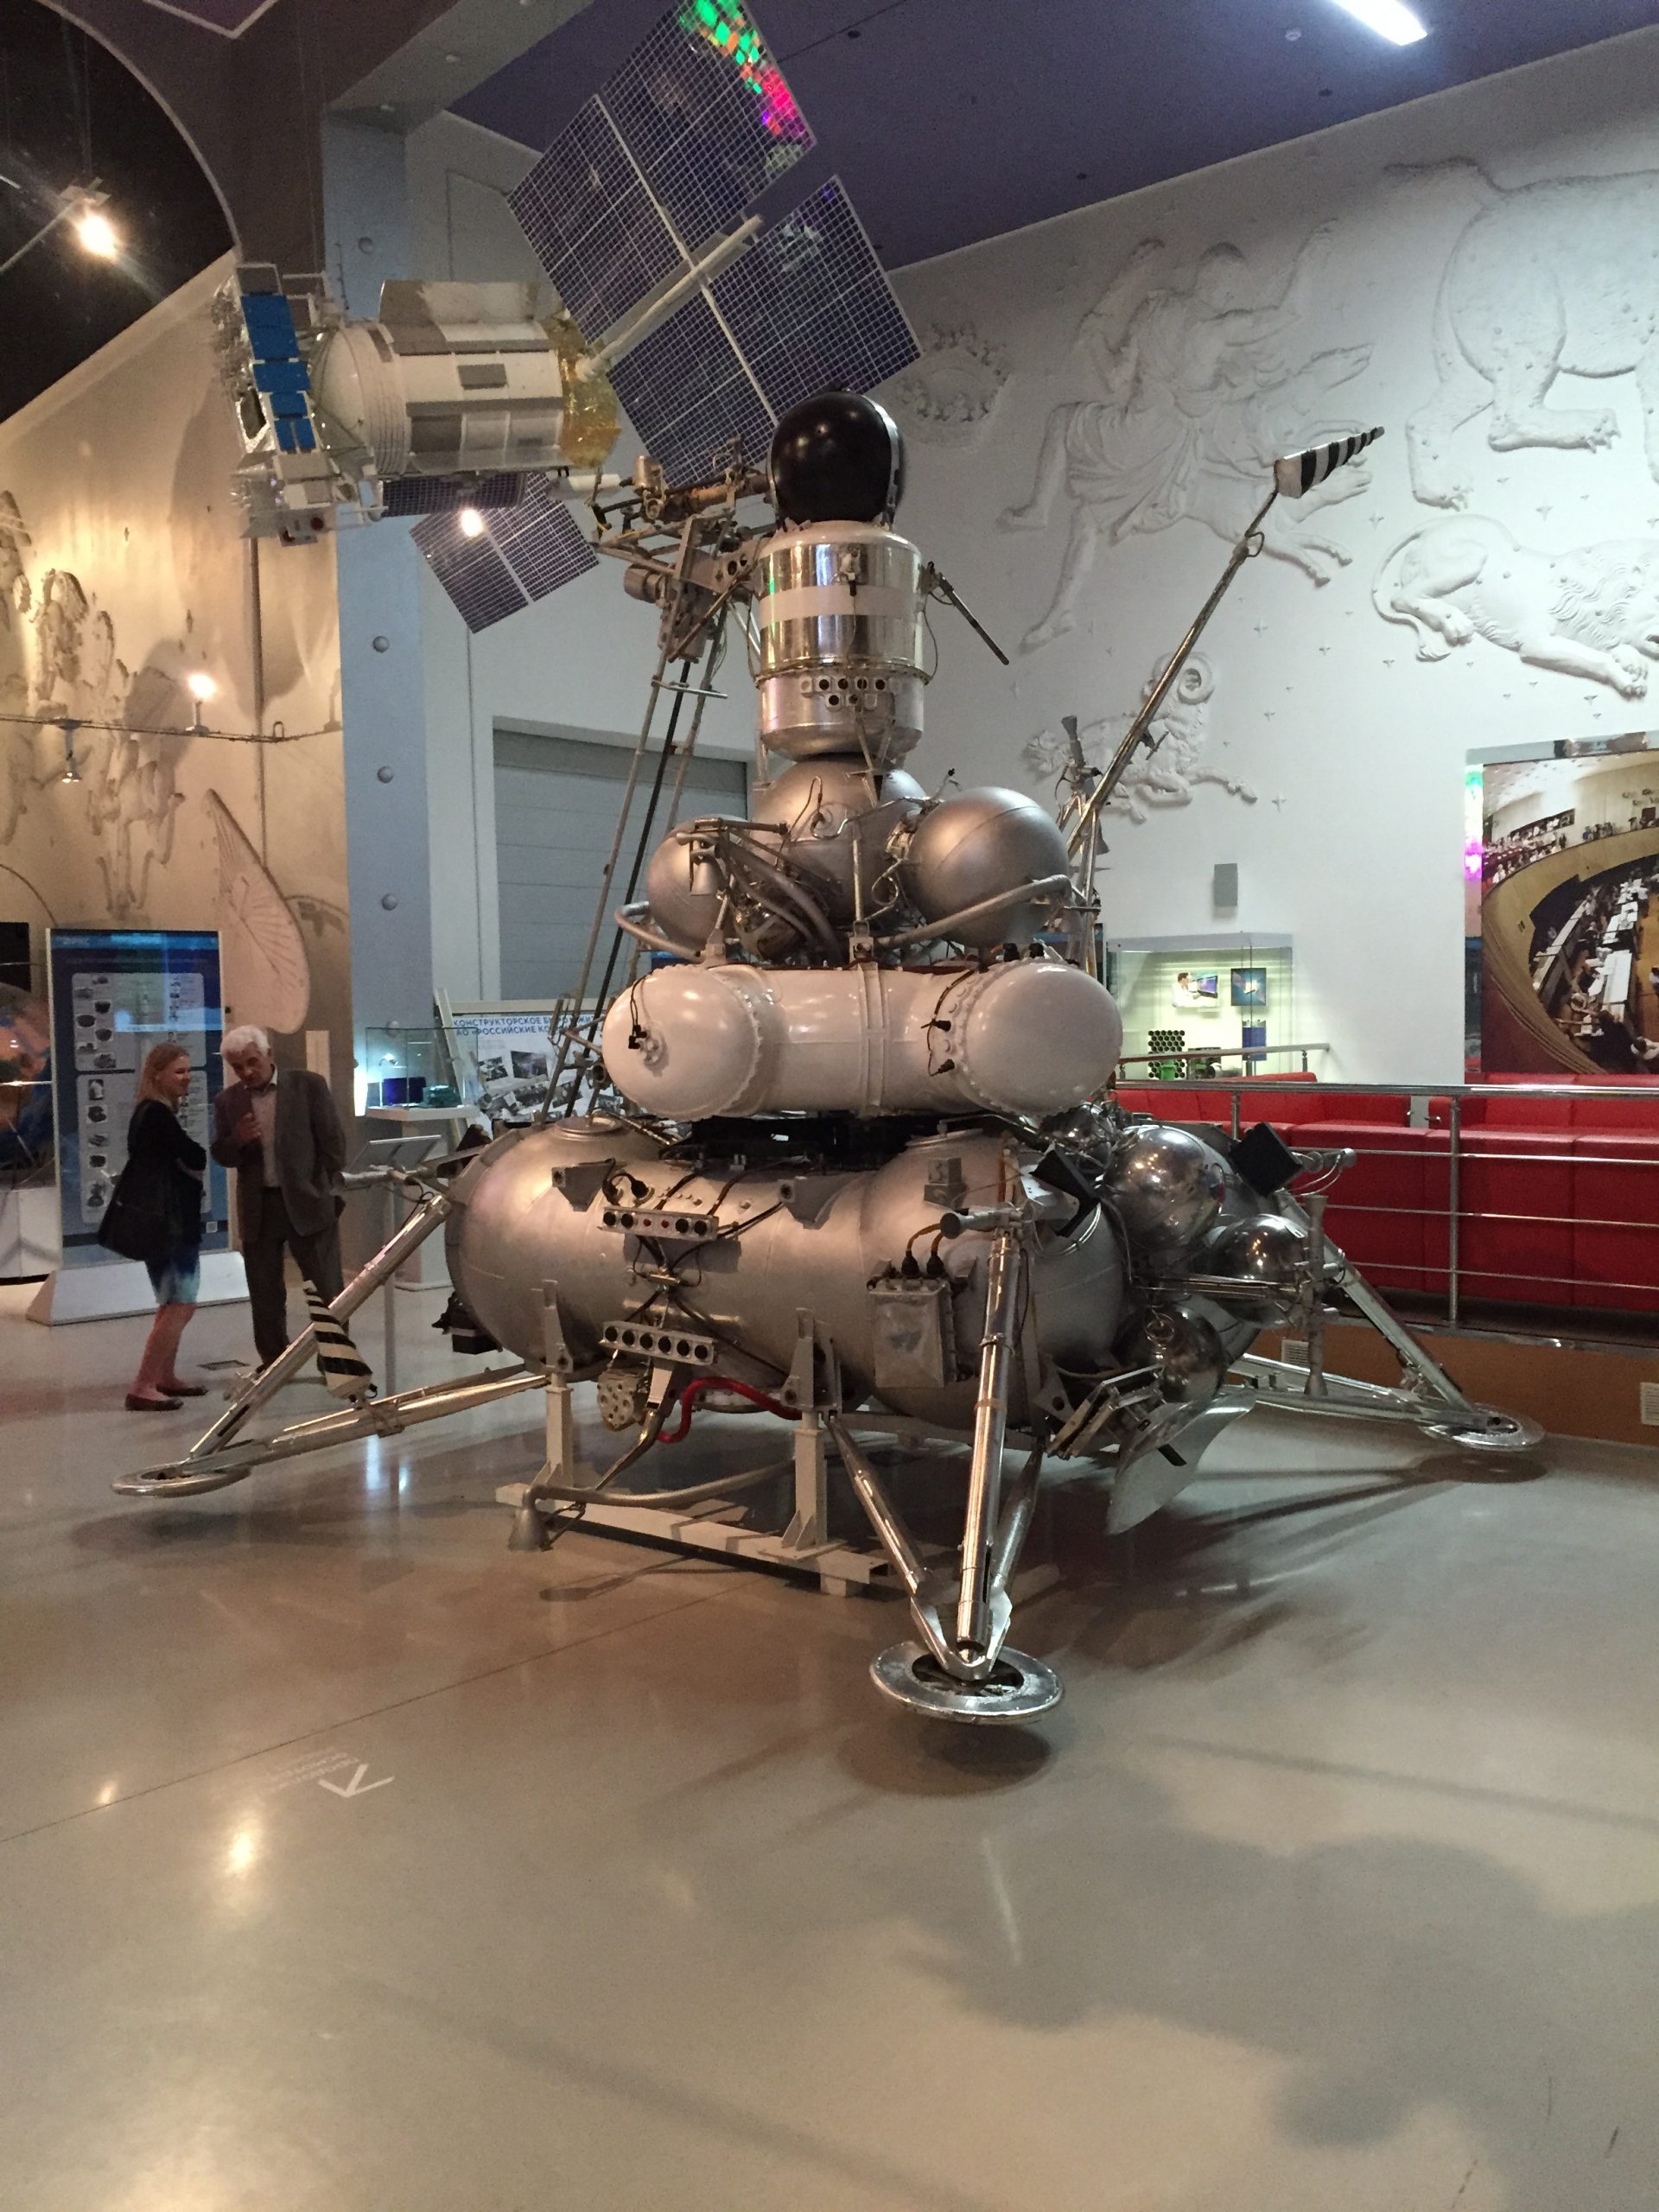 A full size engineering model of the Luna 24 spacecraft on display in Museum of Cosmonautics, Moscow.craft in 